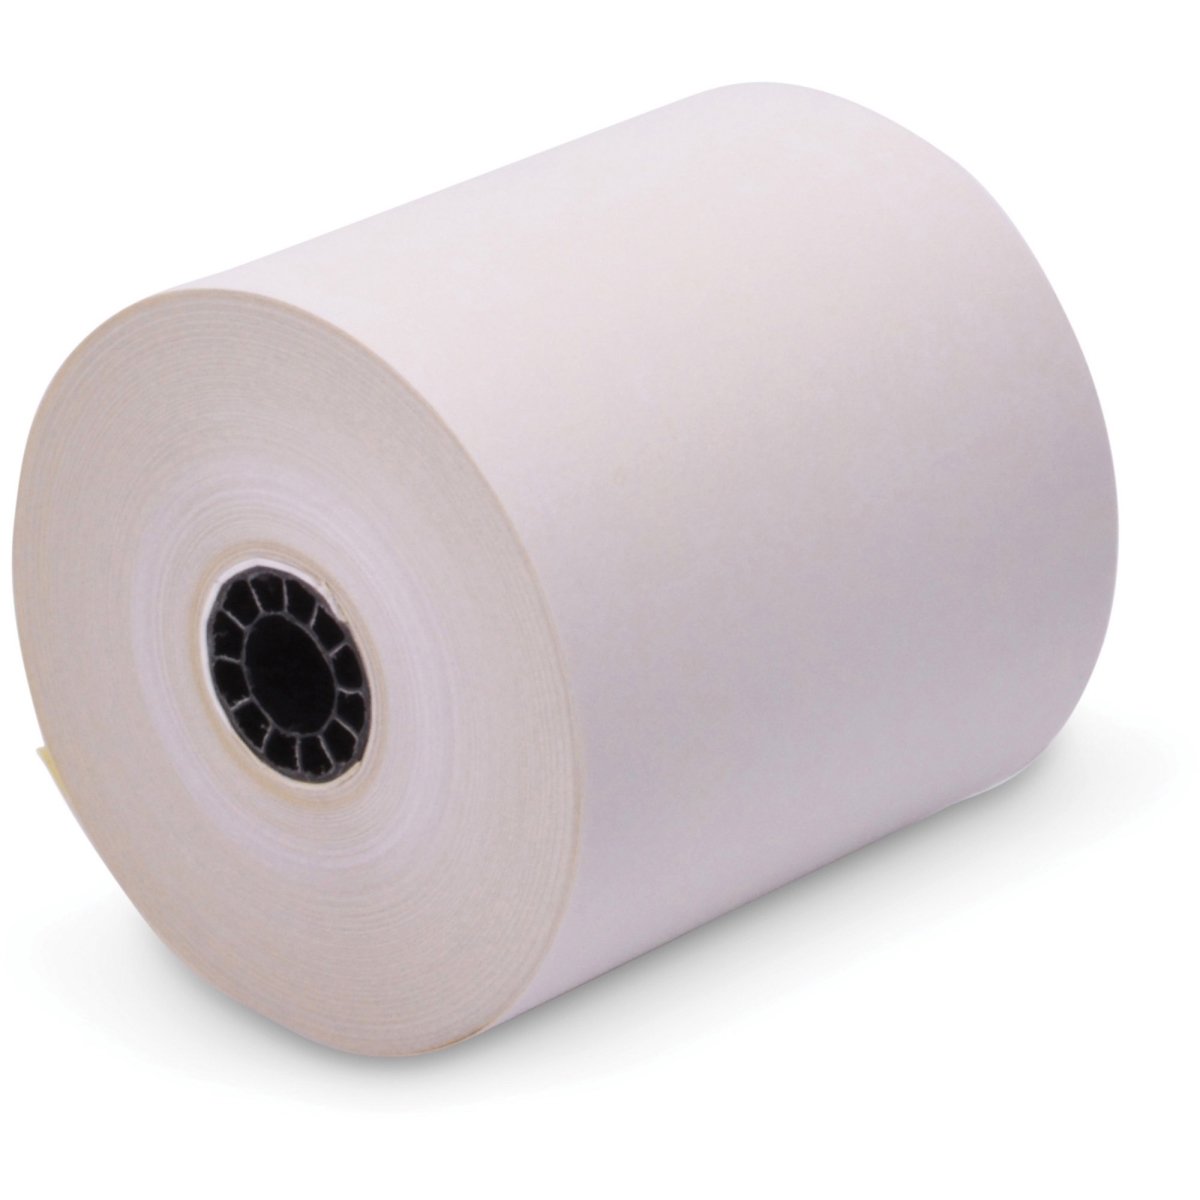 Iconex Icx90770442 2.25 In. Carbonless Print Paper Receipt Roll, White - Pack Of 12